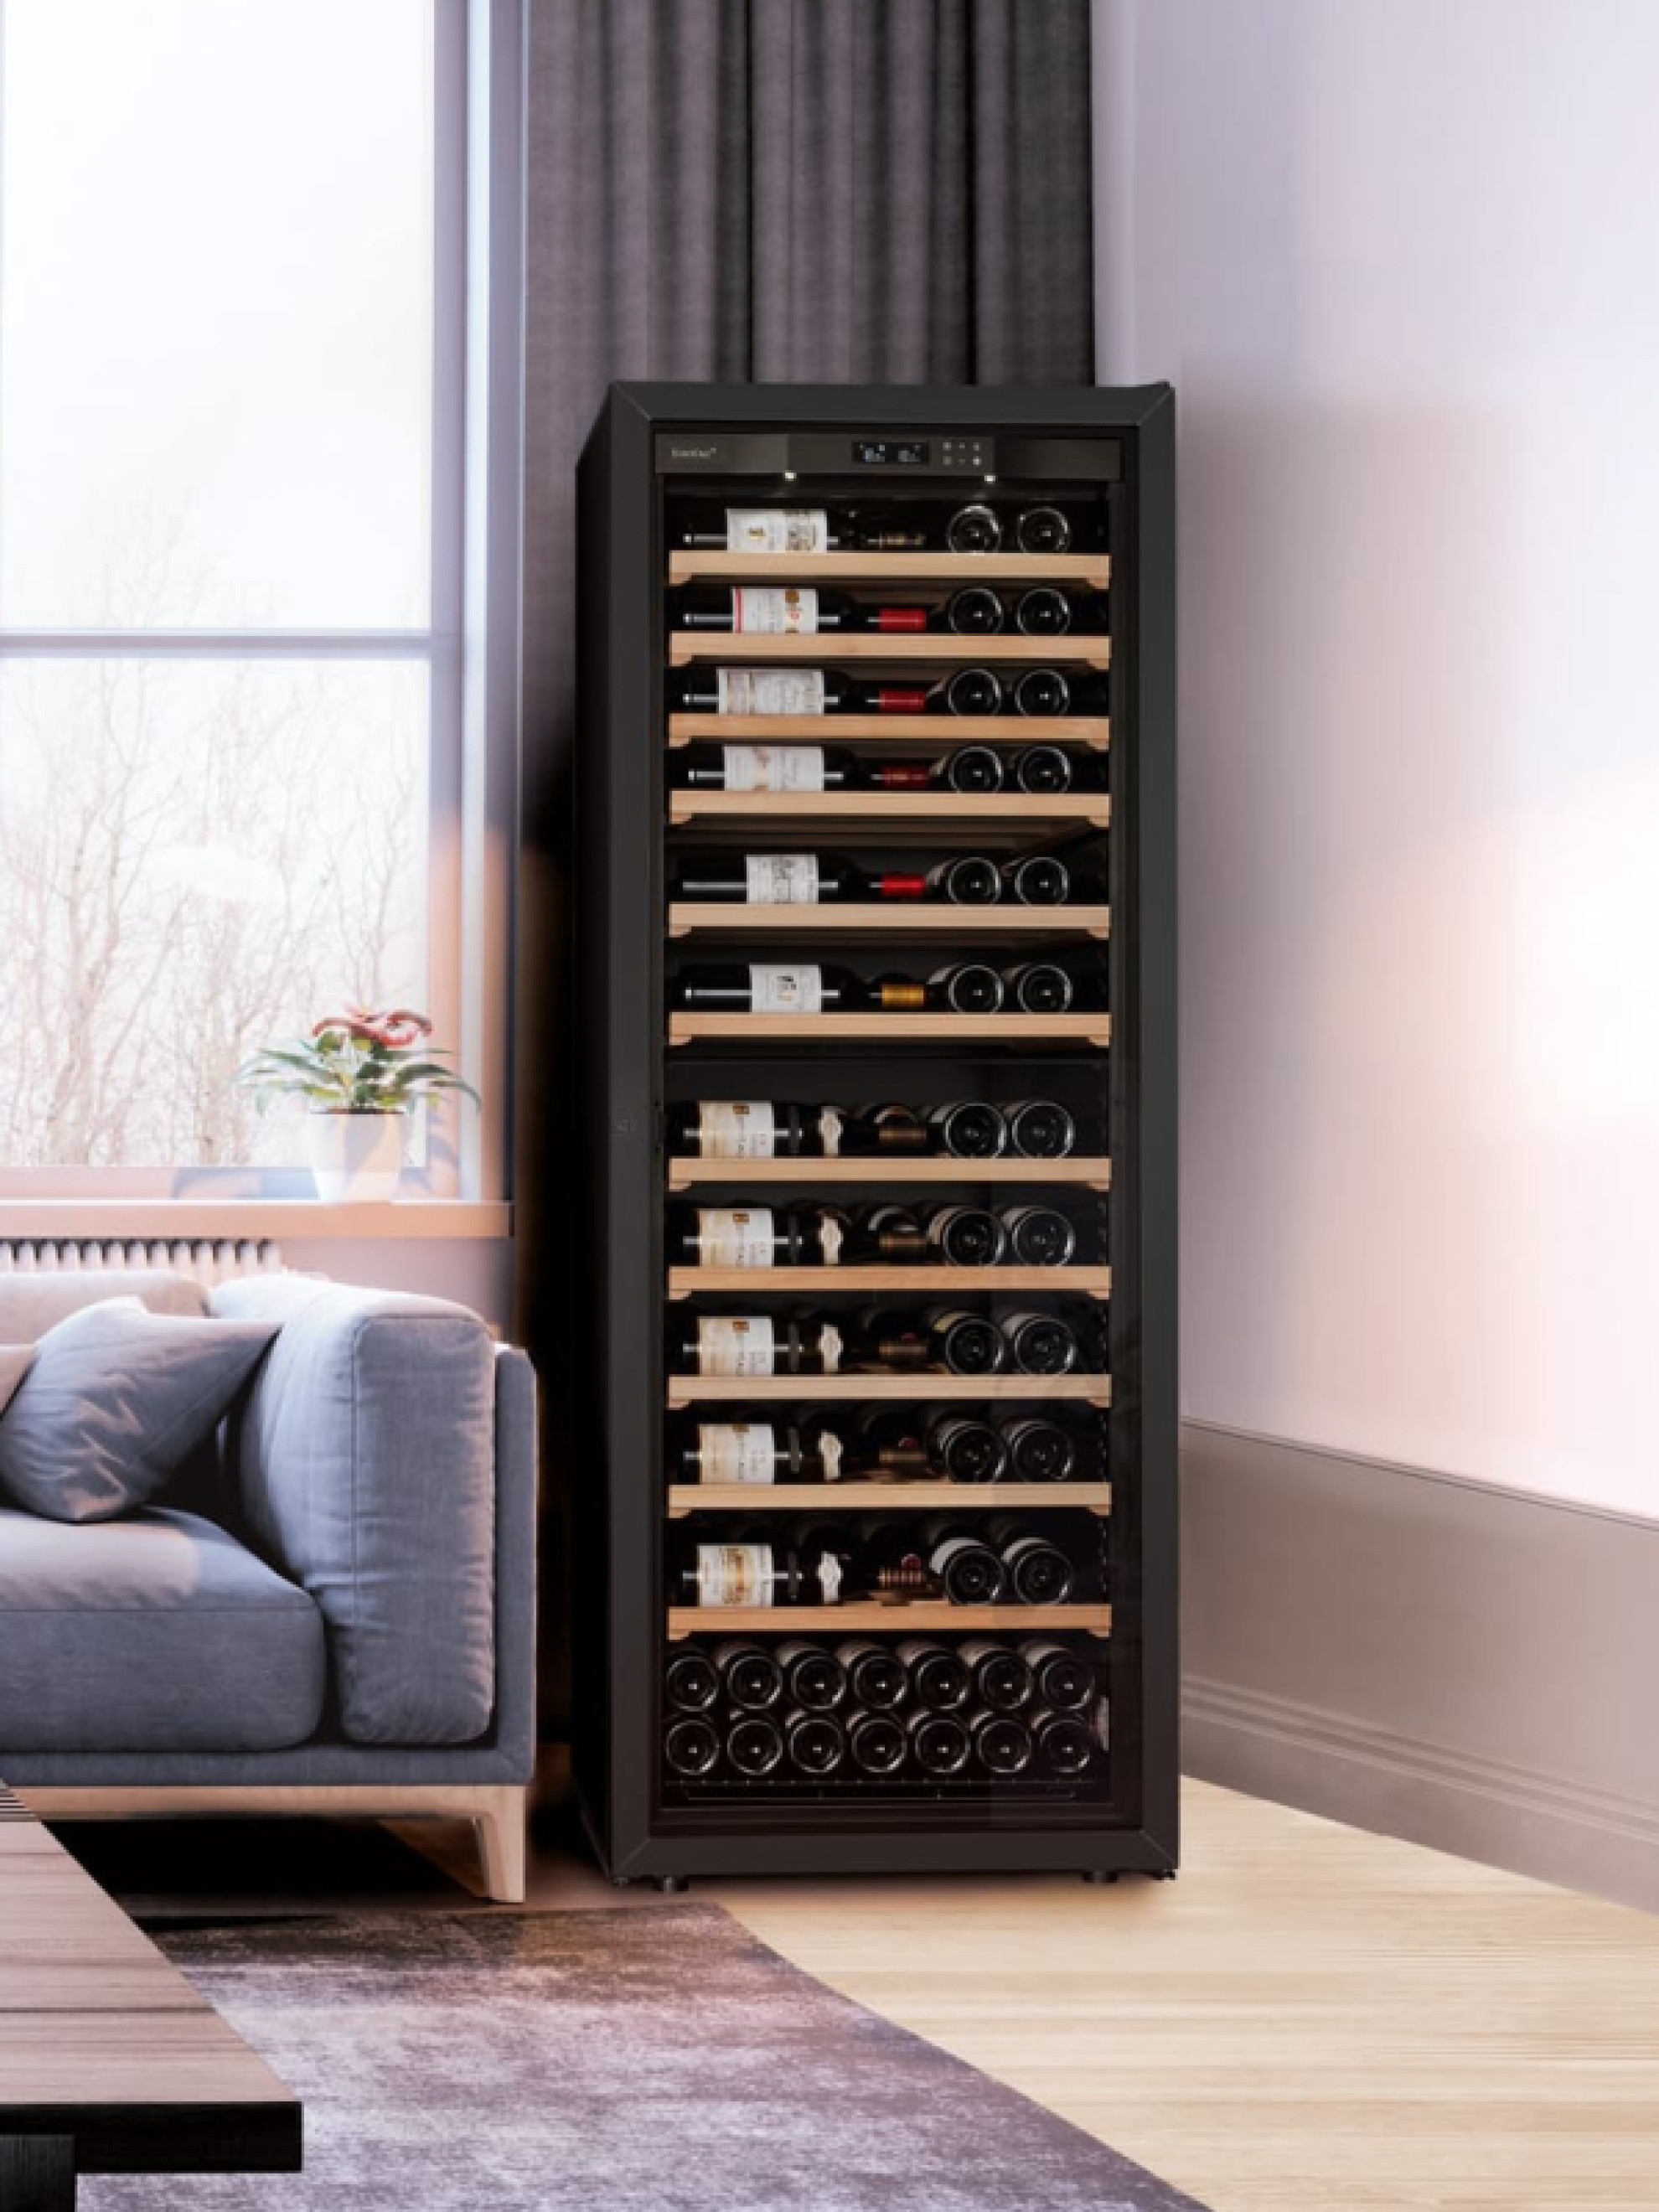 Large multi-temperature wine cooler with temperature staggering from top to bottom - Première EuroCave